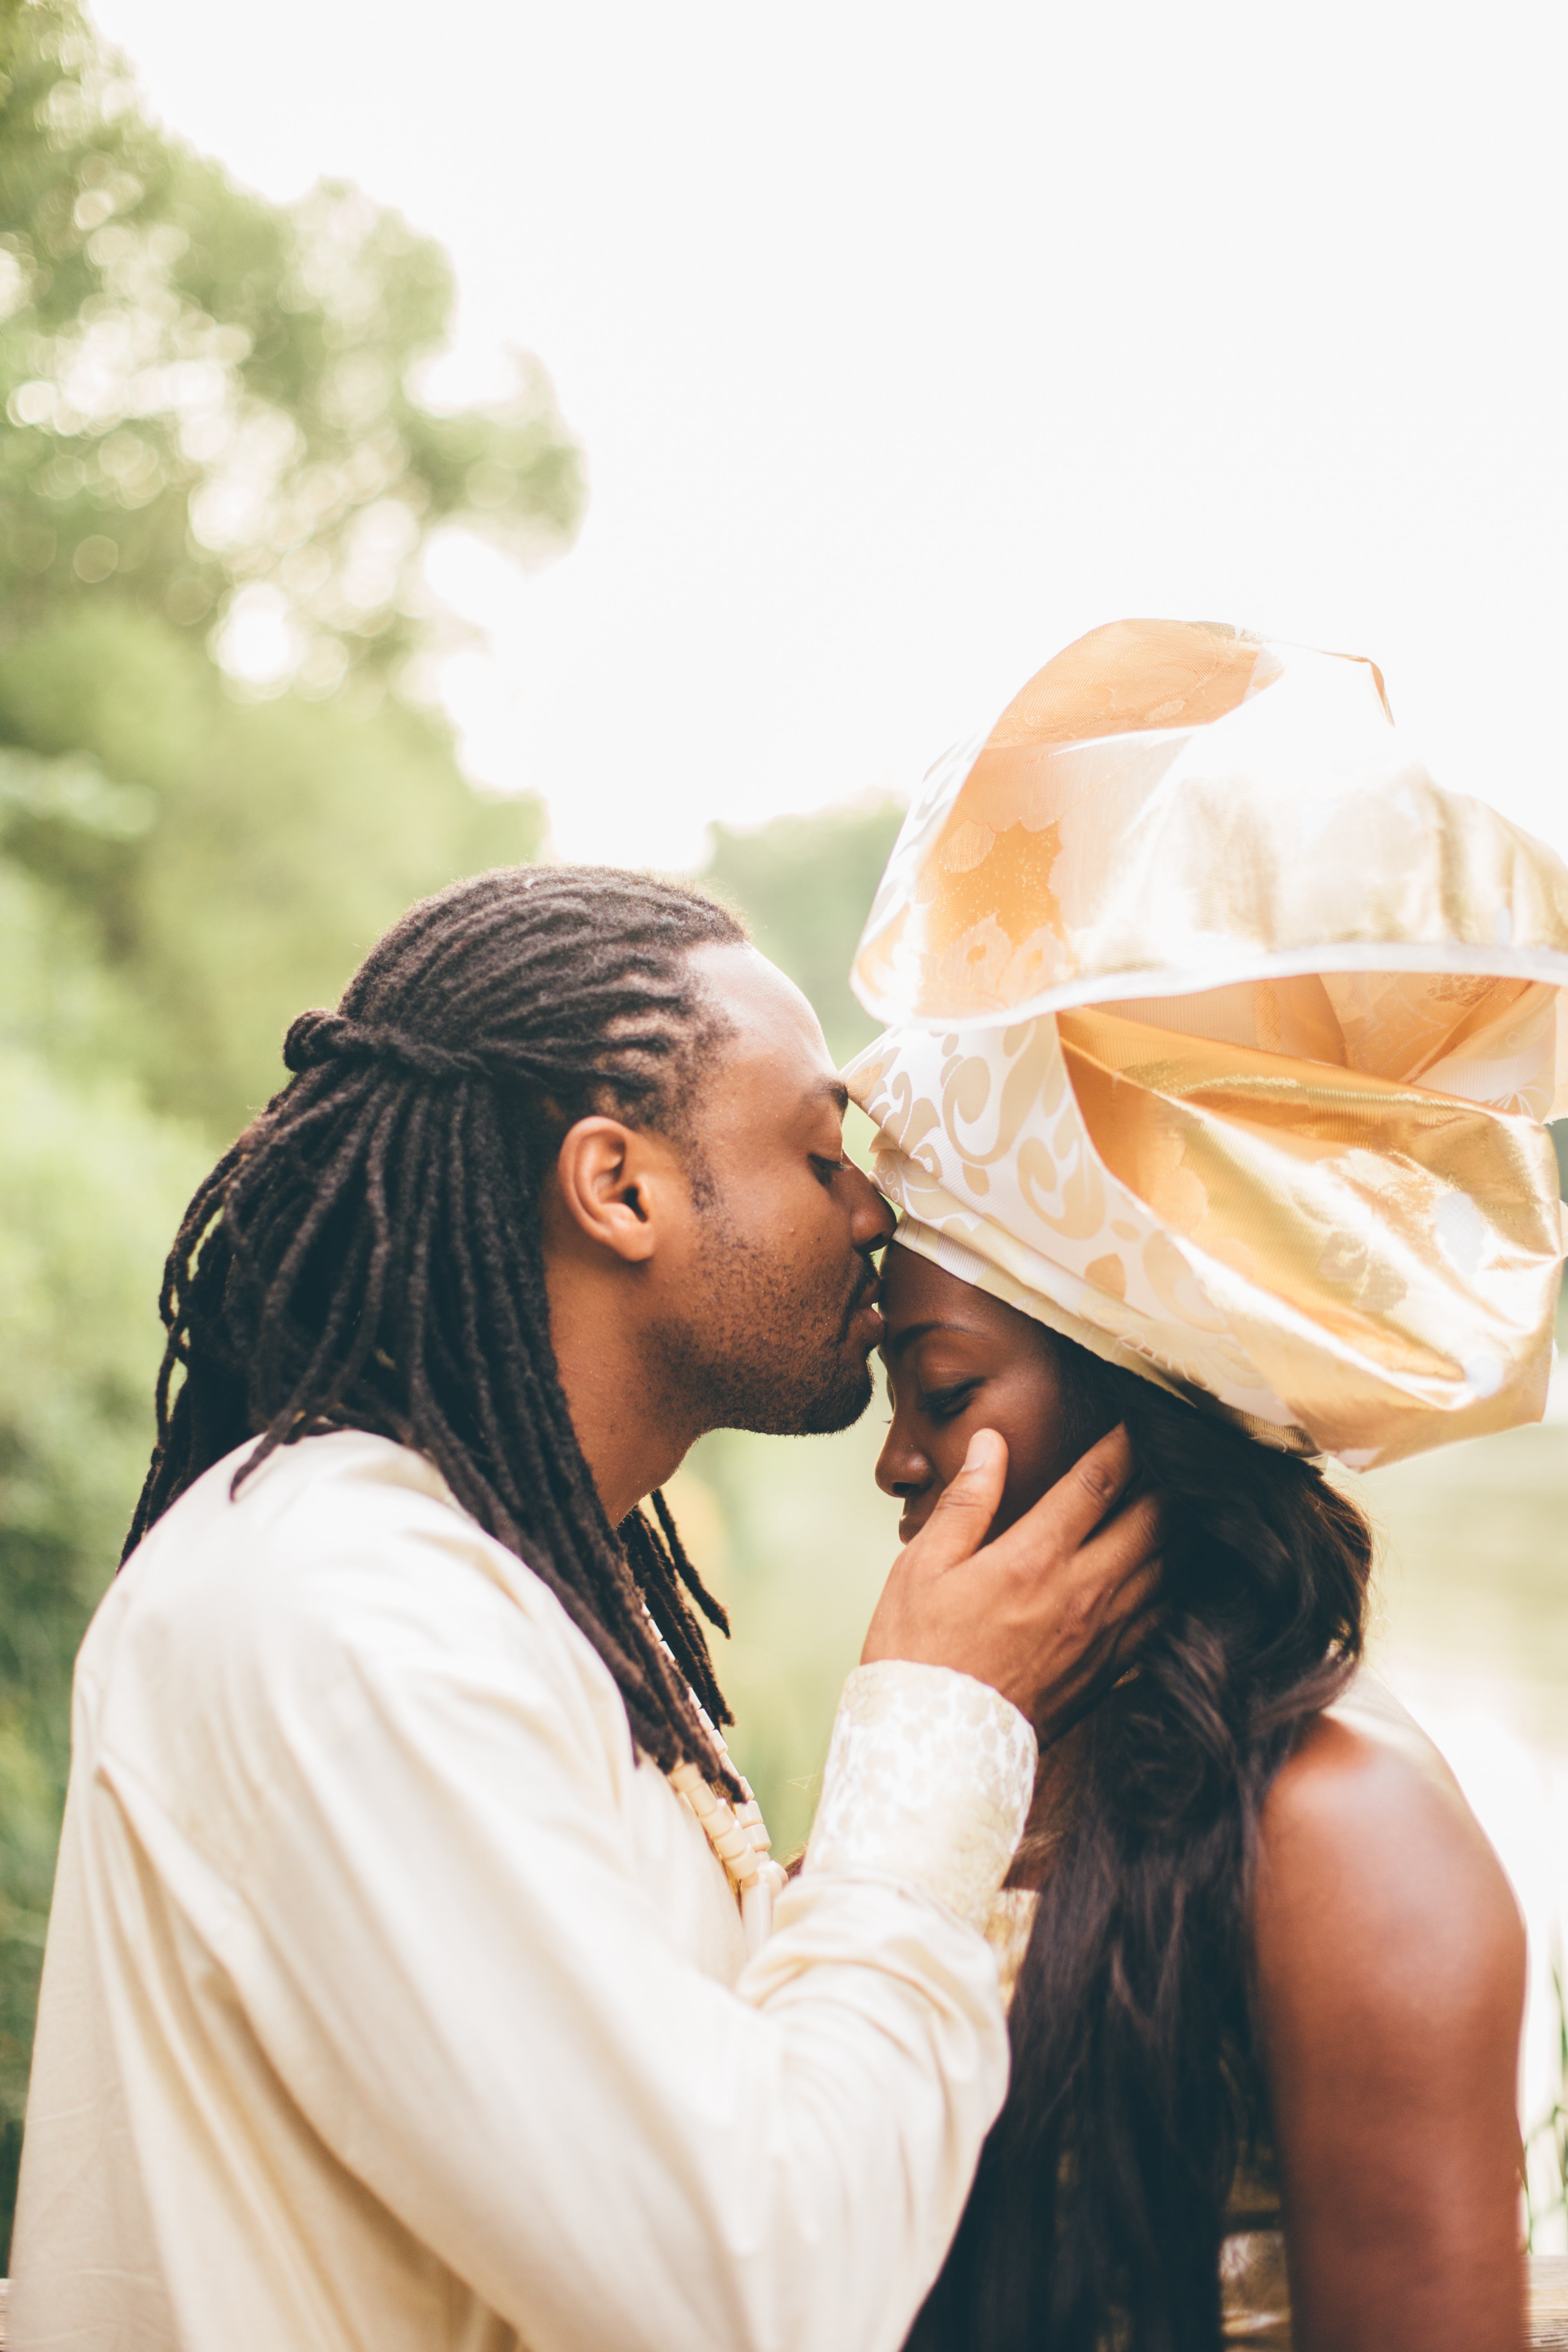 The Most Romantic Forehead Kisses Ever!
